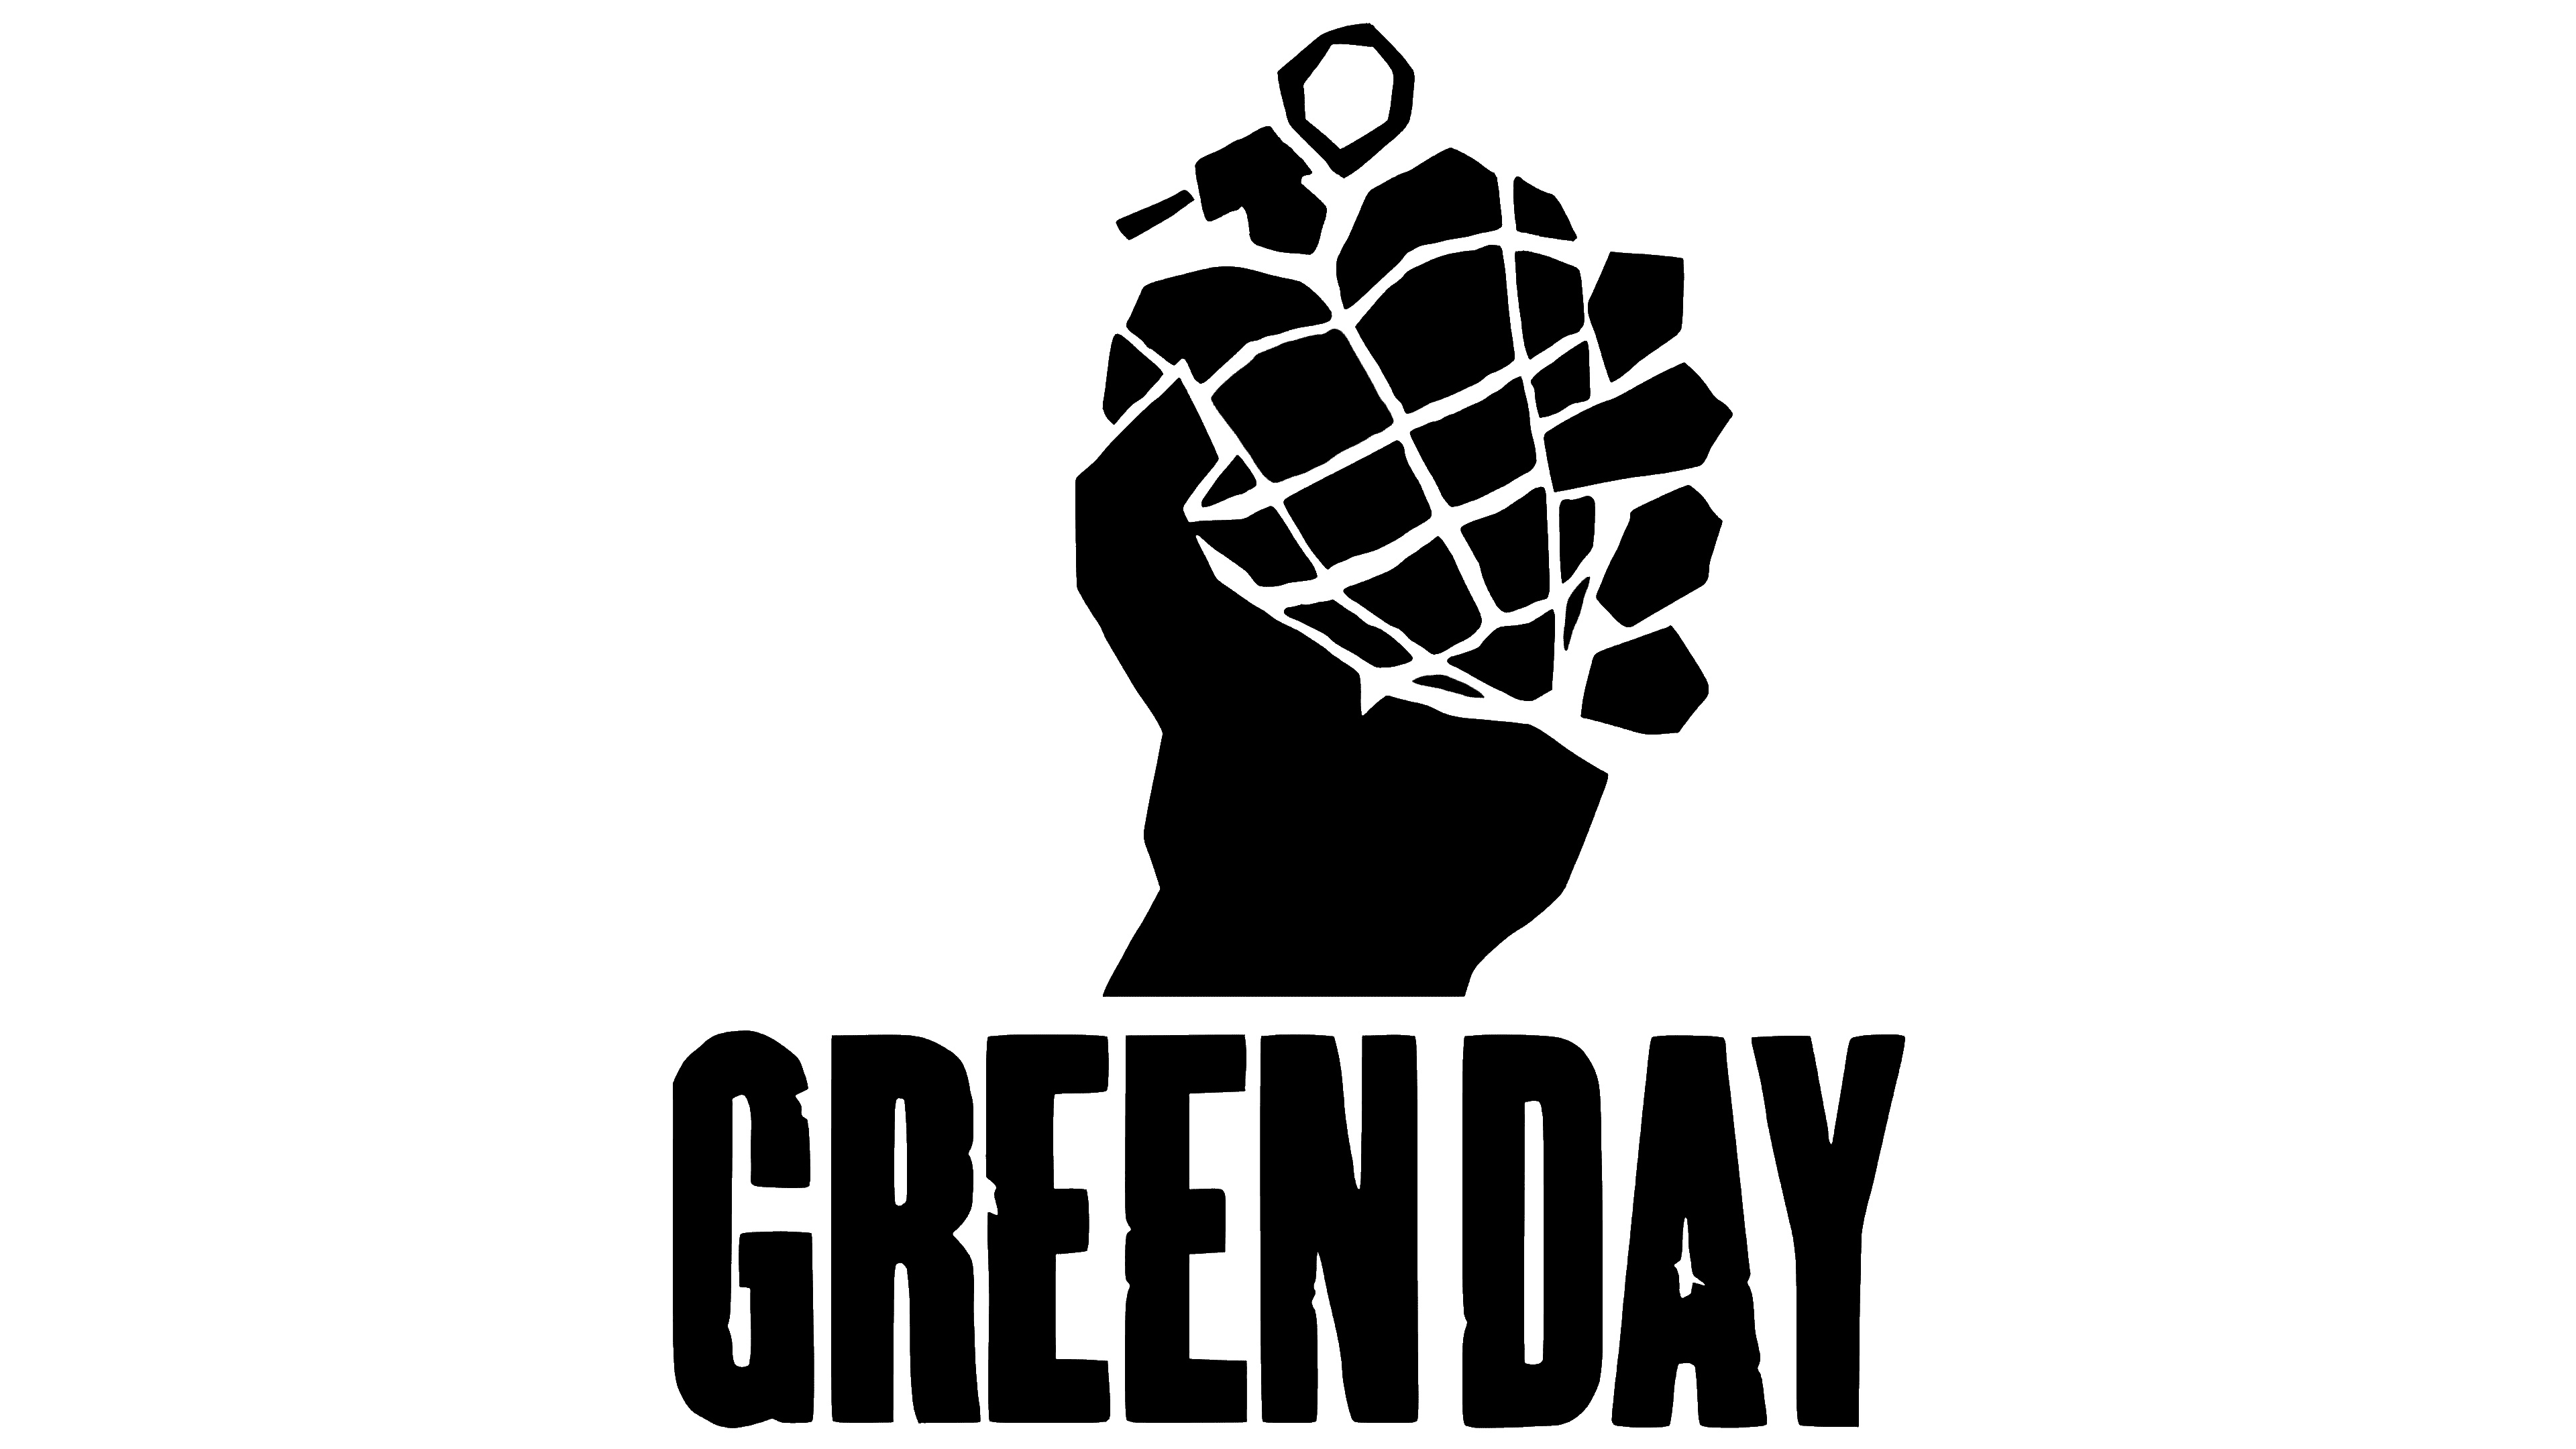 Green Day (Band): The group that has been nominated for 20 Grammy awards and has won five of them. 3840x2160 4K Background.